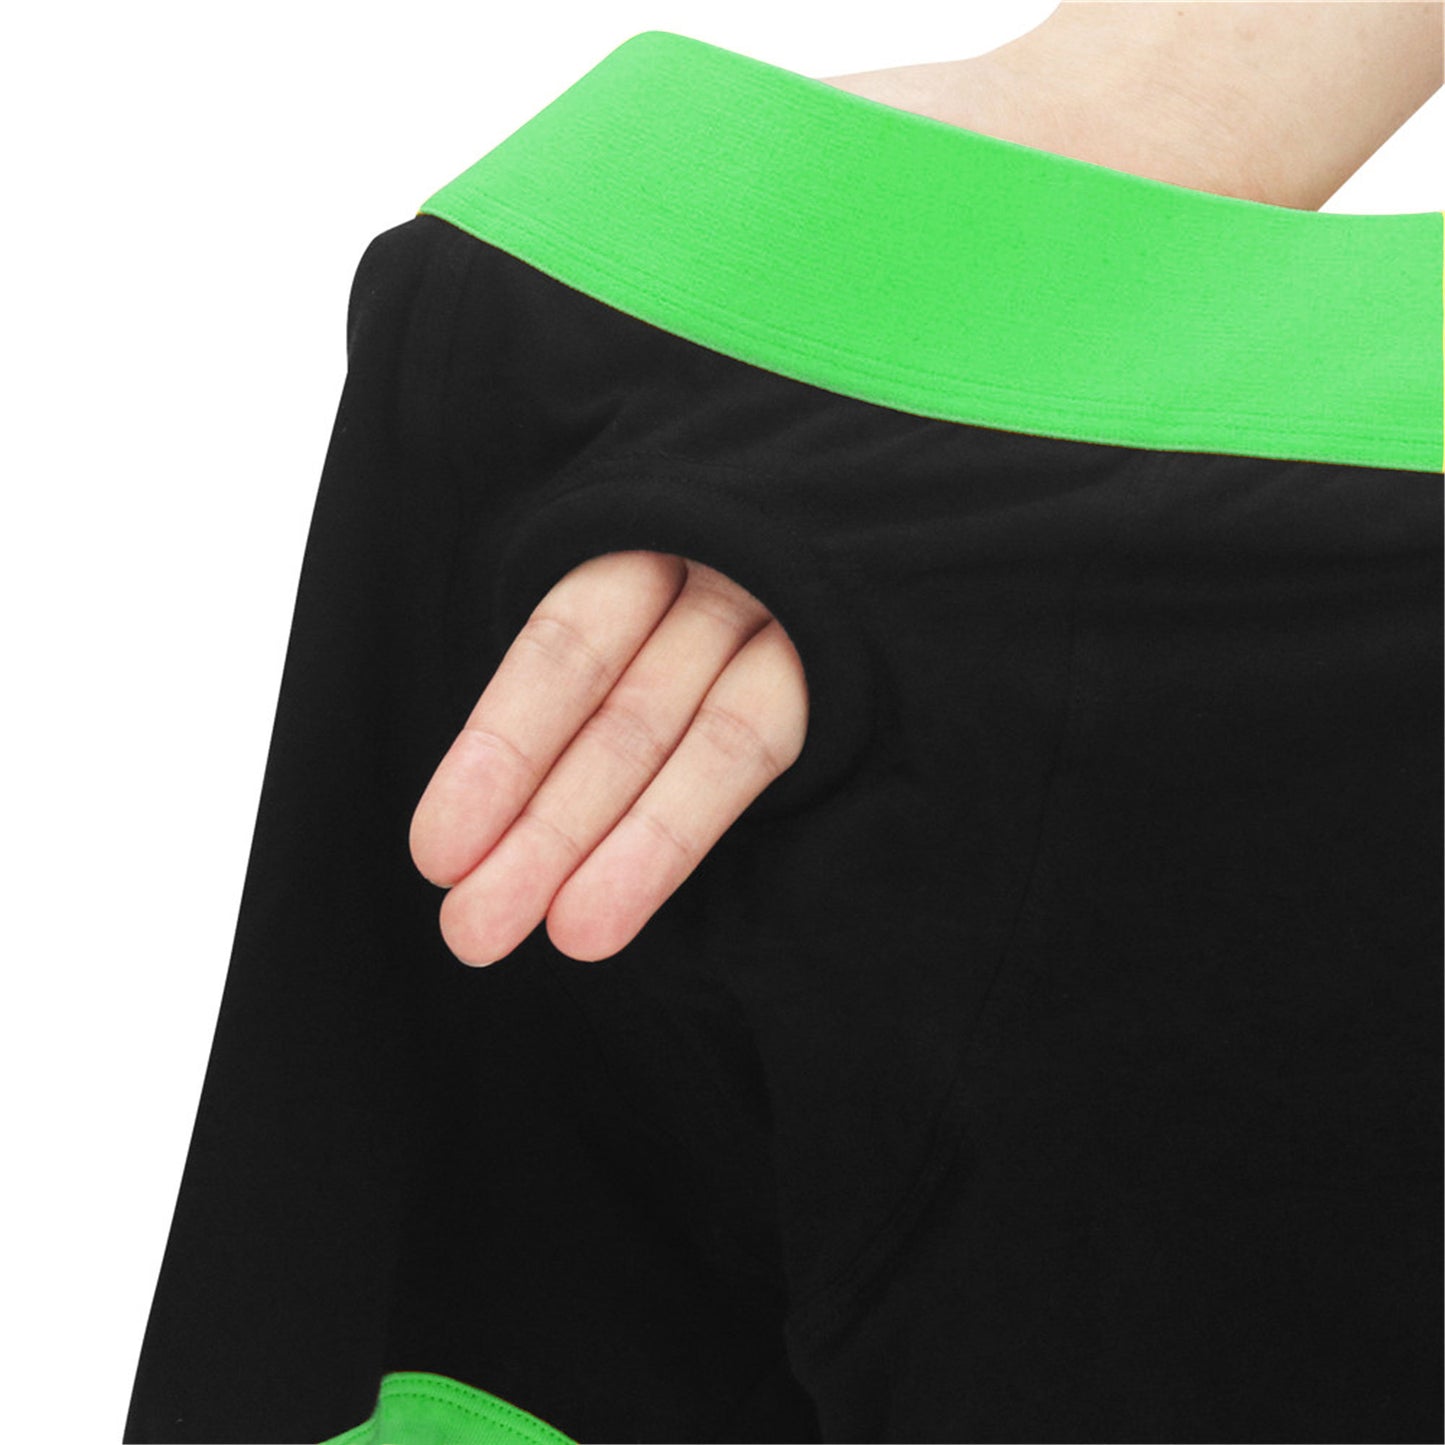 Get Lucky Strap on Boxer Shorts - Xsmall-Small -  Green/black